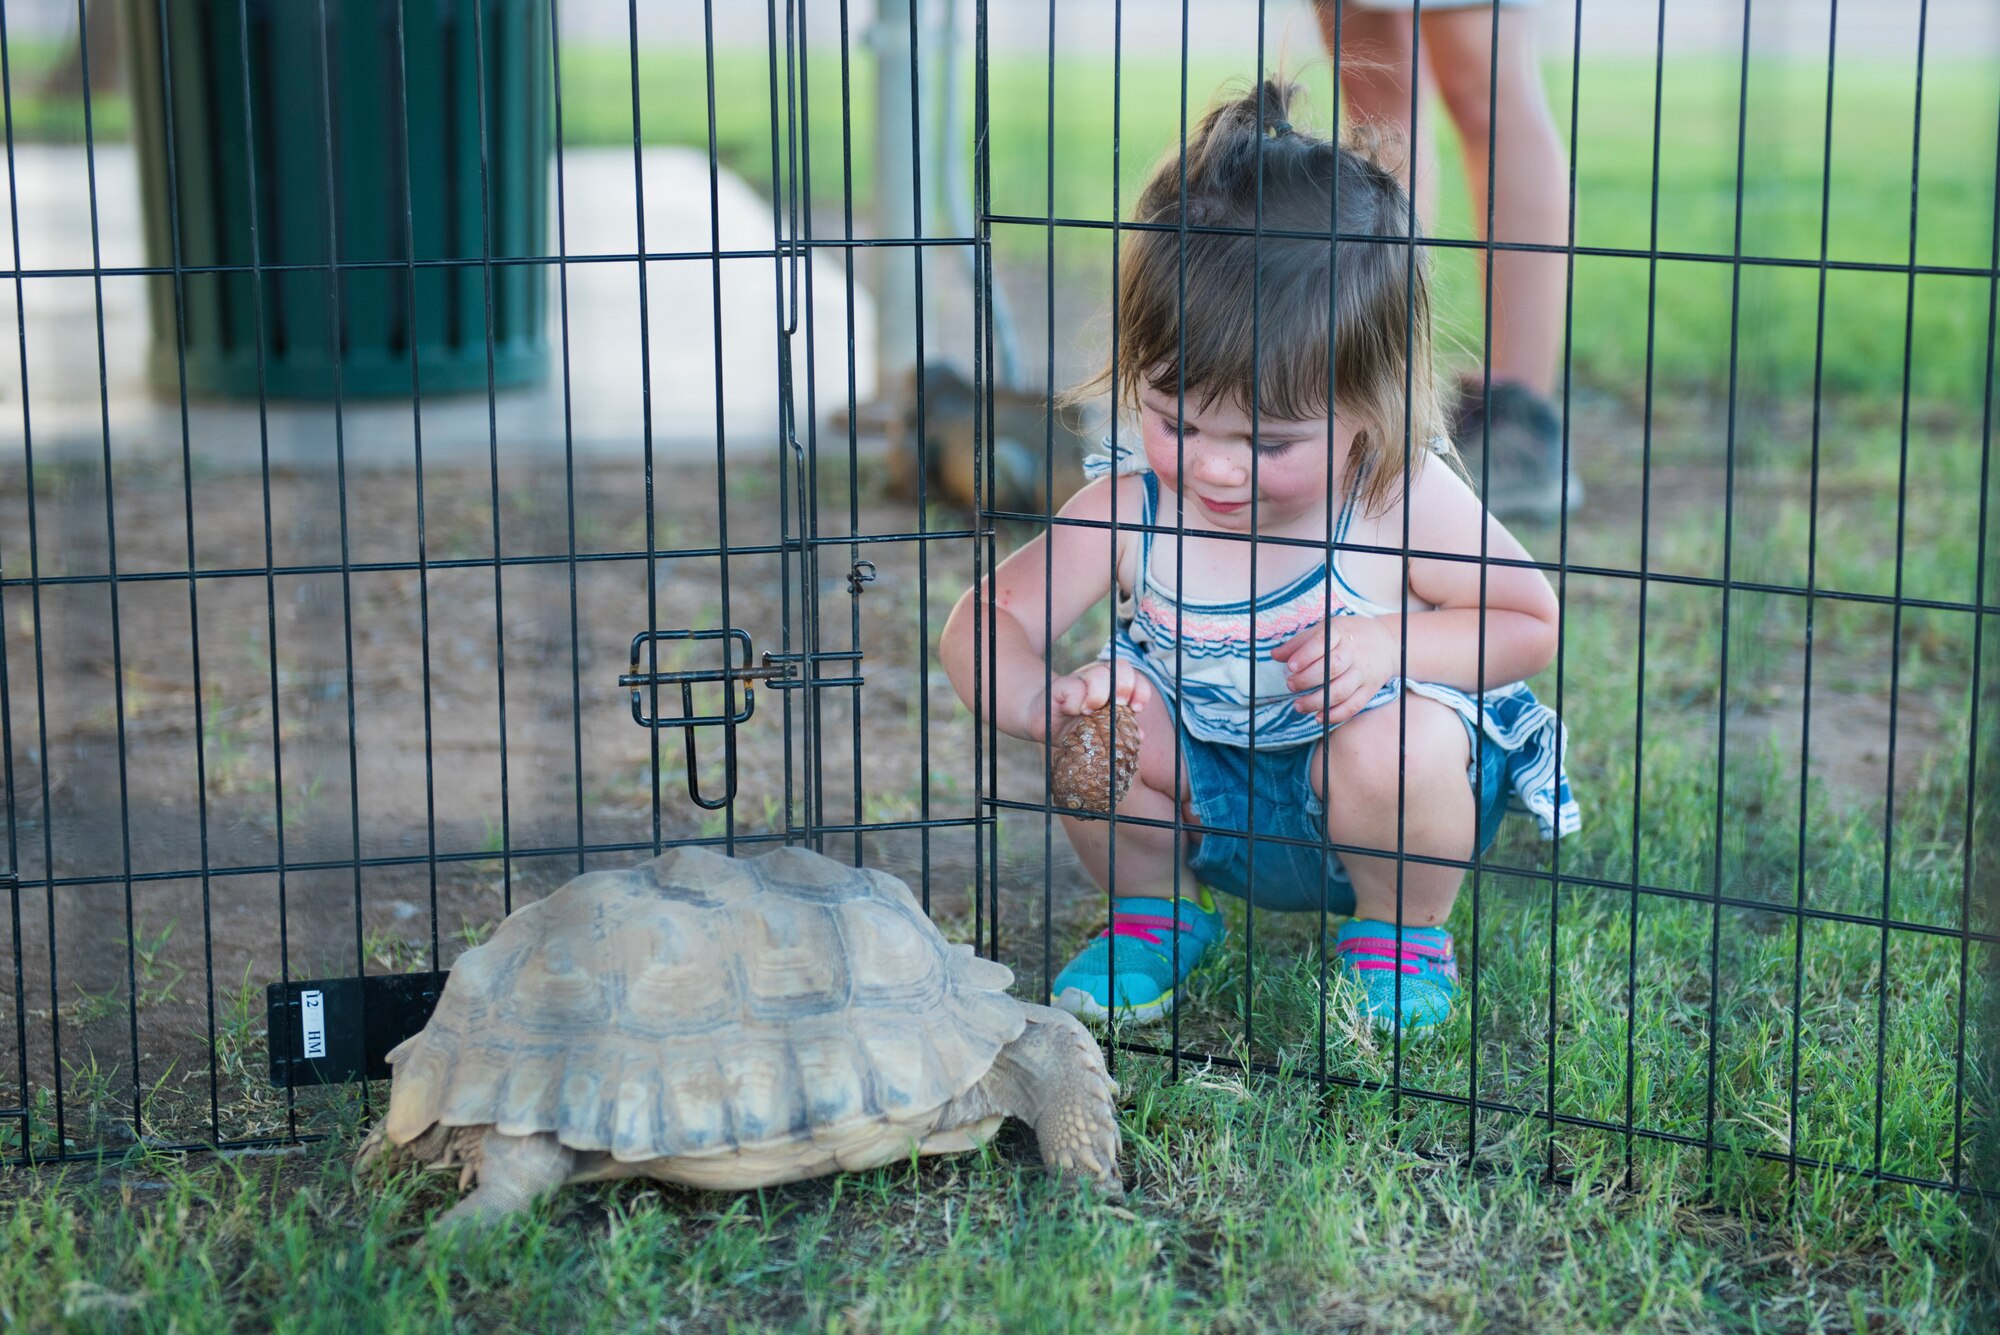 A young girl attempts to feed a pinecone to a tortoise at the Back-To-School Bash July 25, 2018, at Luke Air Force Base, Ariz. The Bash offered family-friendly fun and activities to all attendees, including a small reptile exhibit. (U.S. Air Force photo by Senior Airman Ridge Shan)